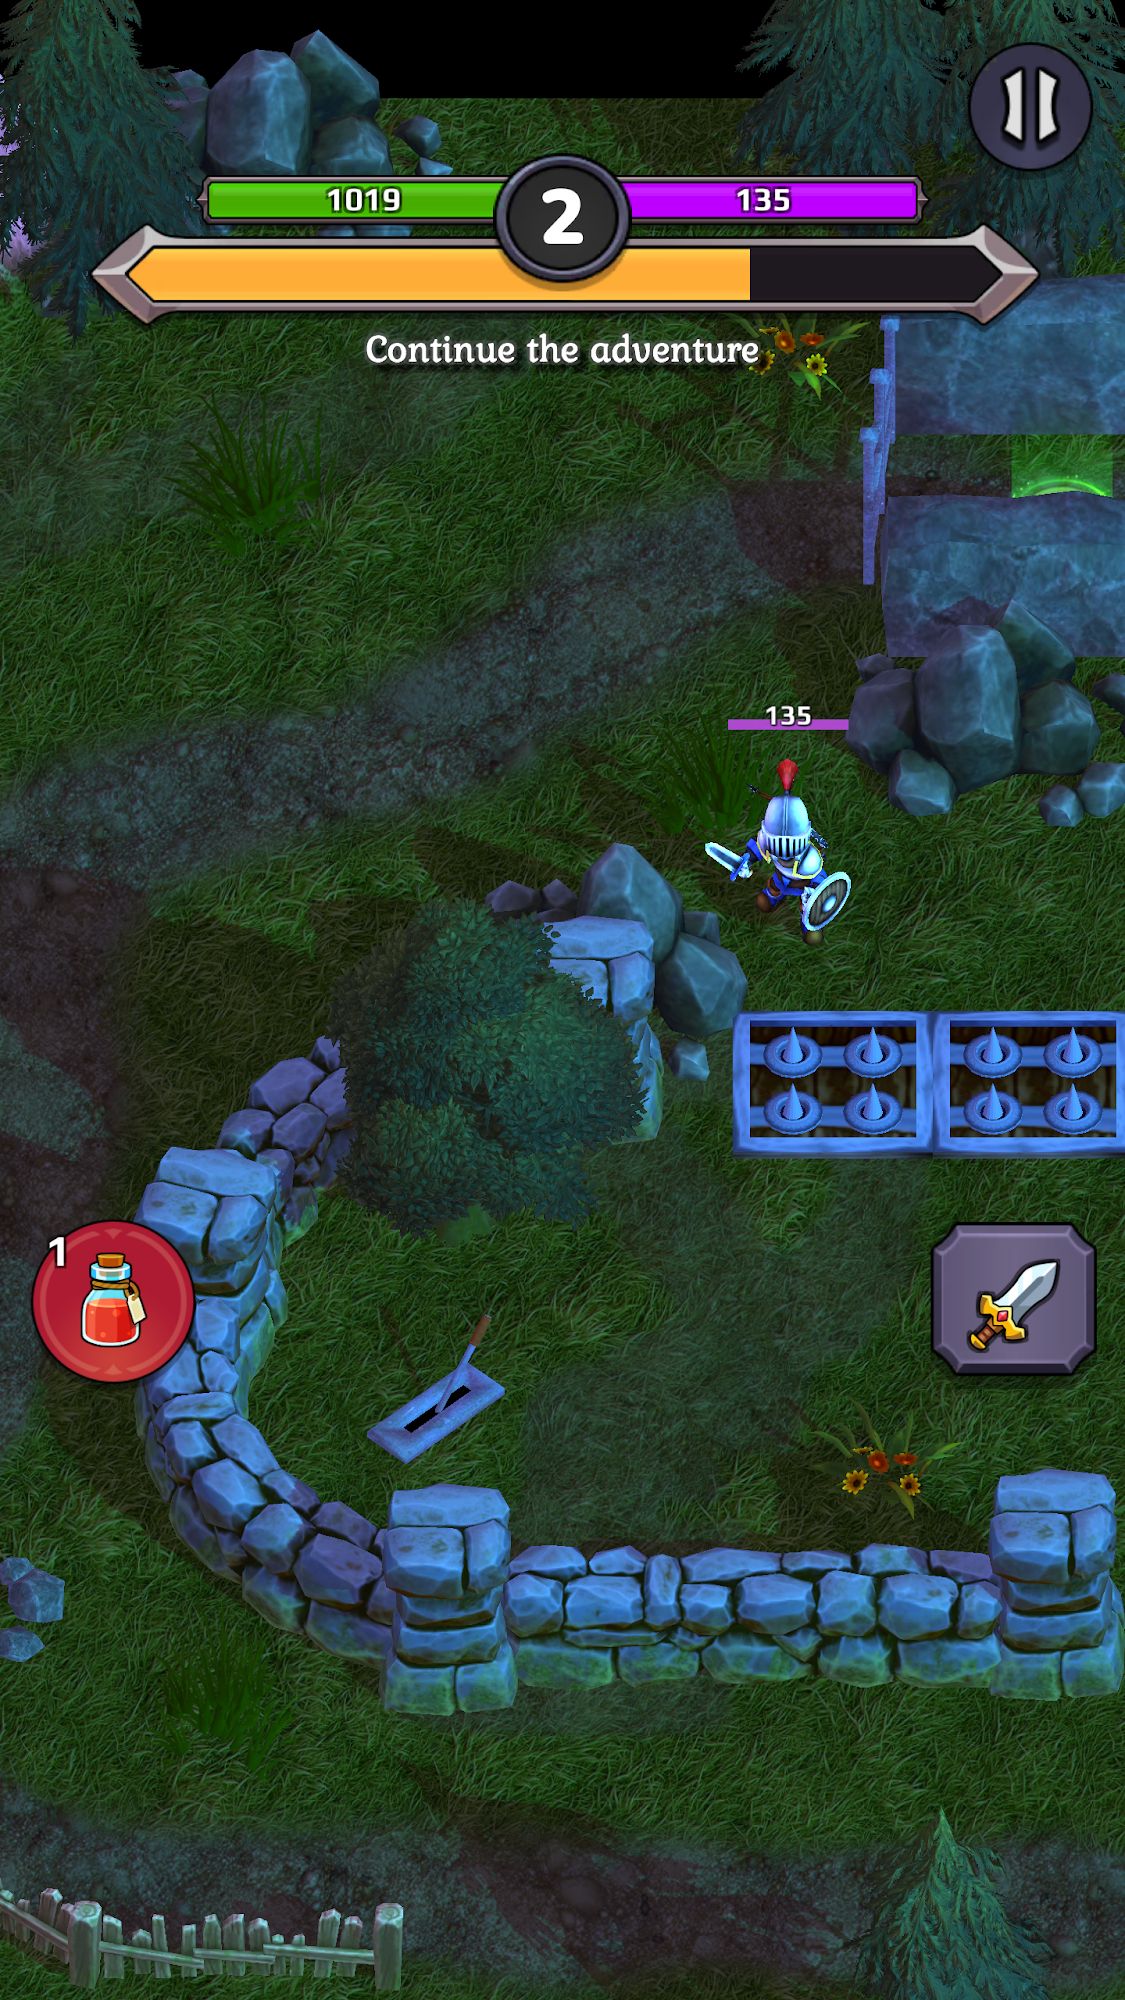 Gameplay of the Crusado: Heroes Roguelike RPG for Android phone or tablet.